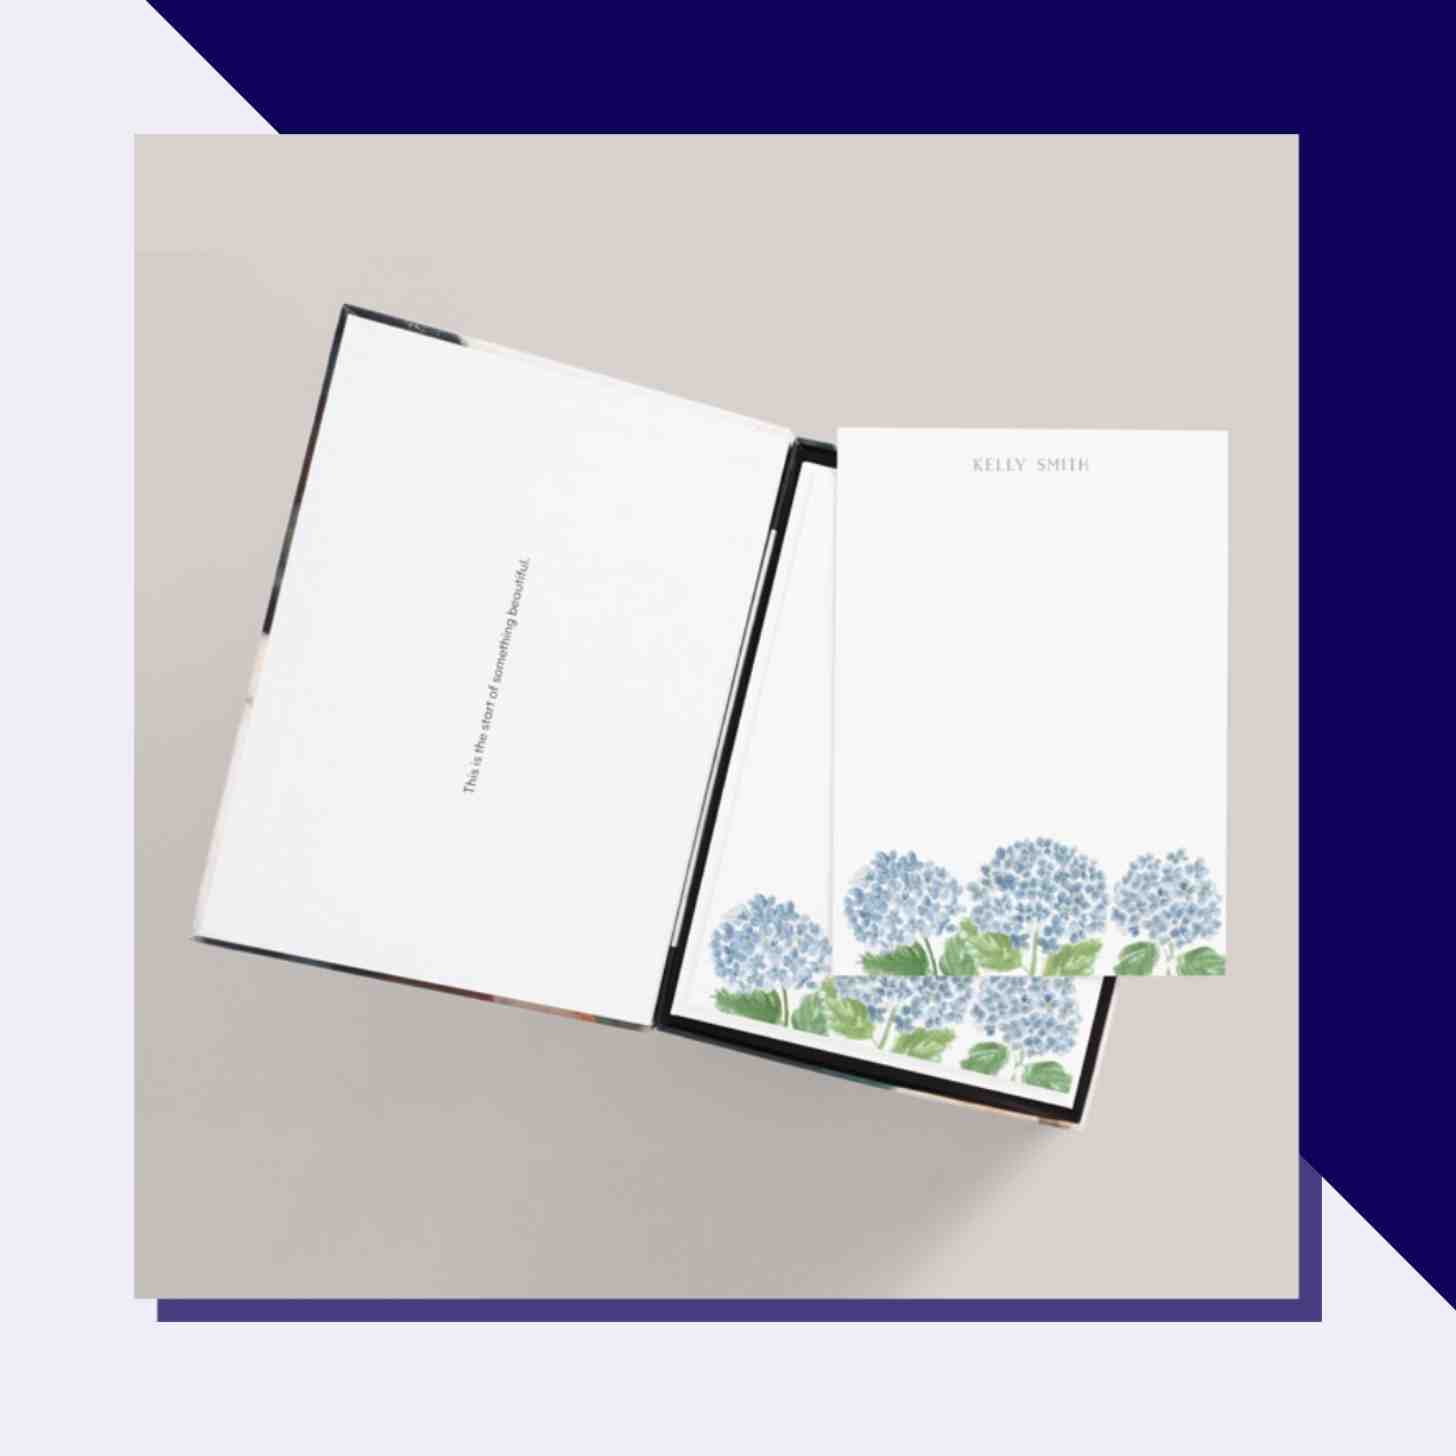 A Set of Personalized Stationery With a Flowery Design